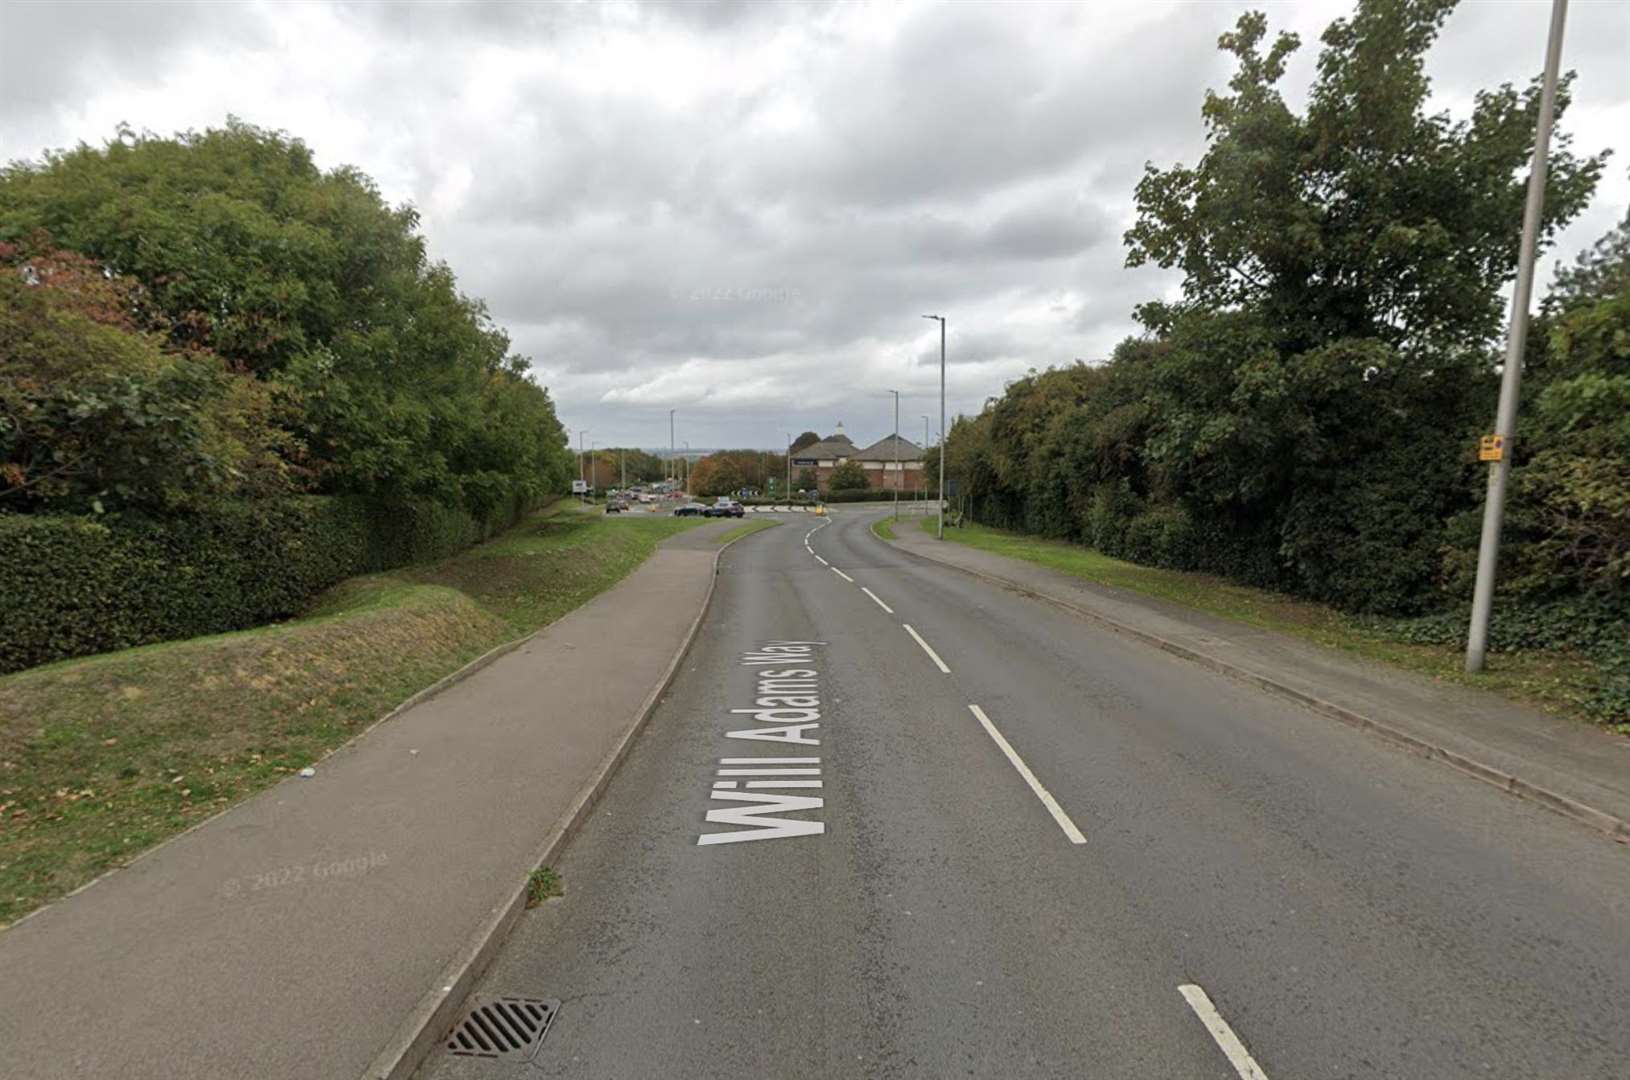 The alleged assault happened in Will Adams Way, Gillingham. Picture: Google Maps